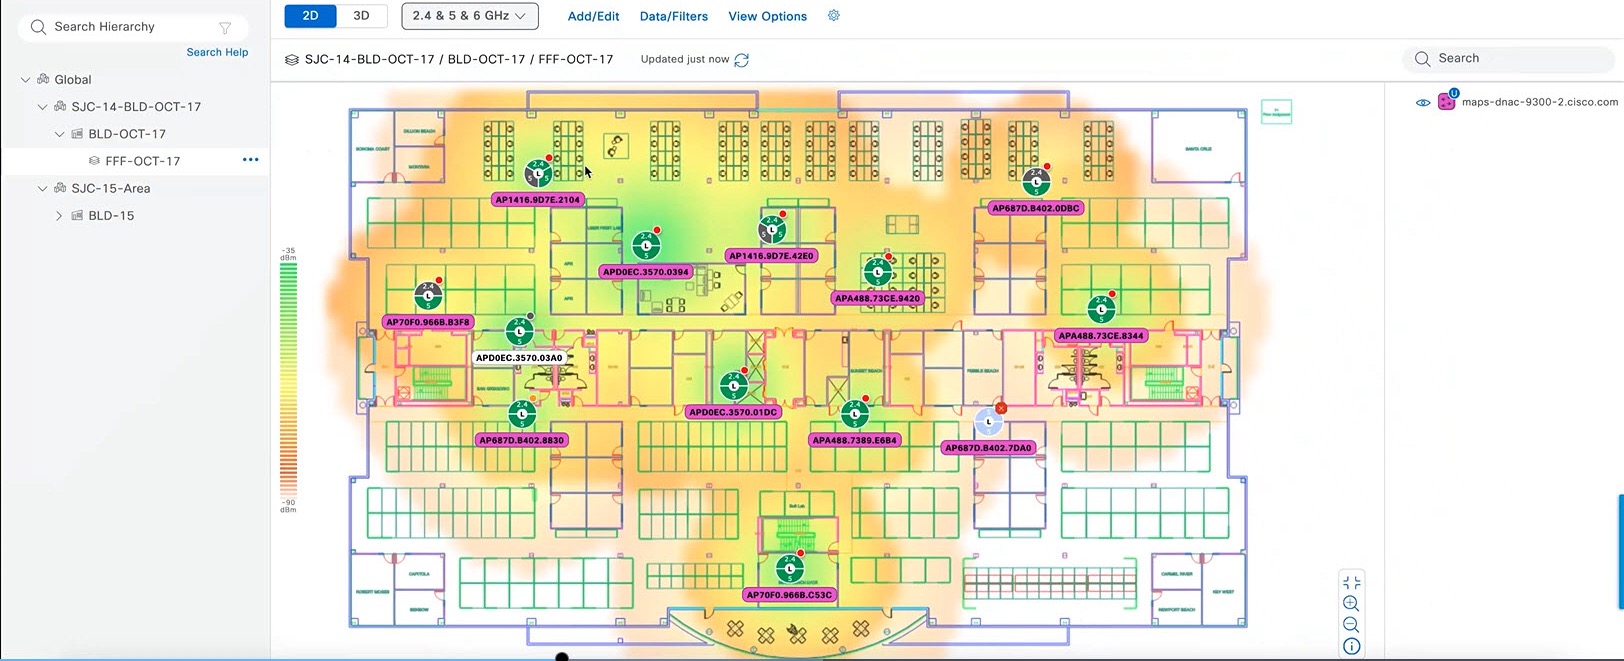 The wireless 2D floor map displays the position of the APs, and any unmanaged switches are listed in the right pane.